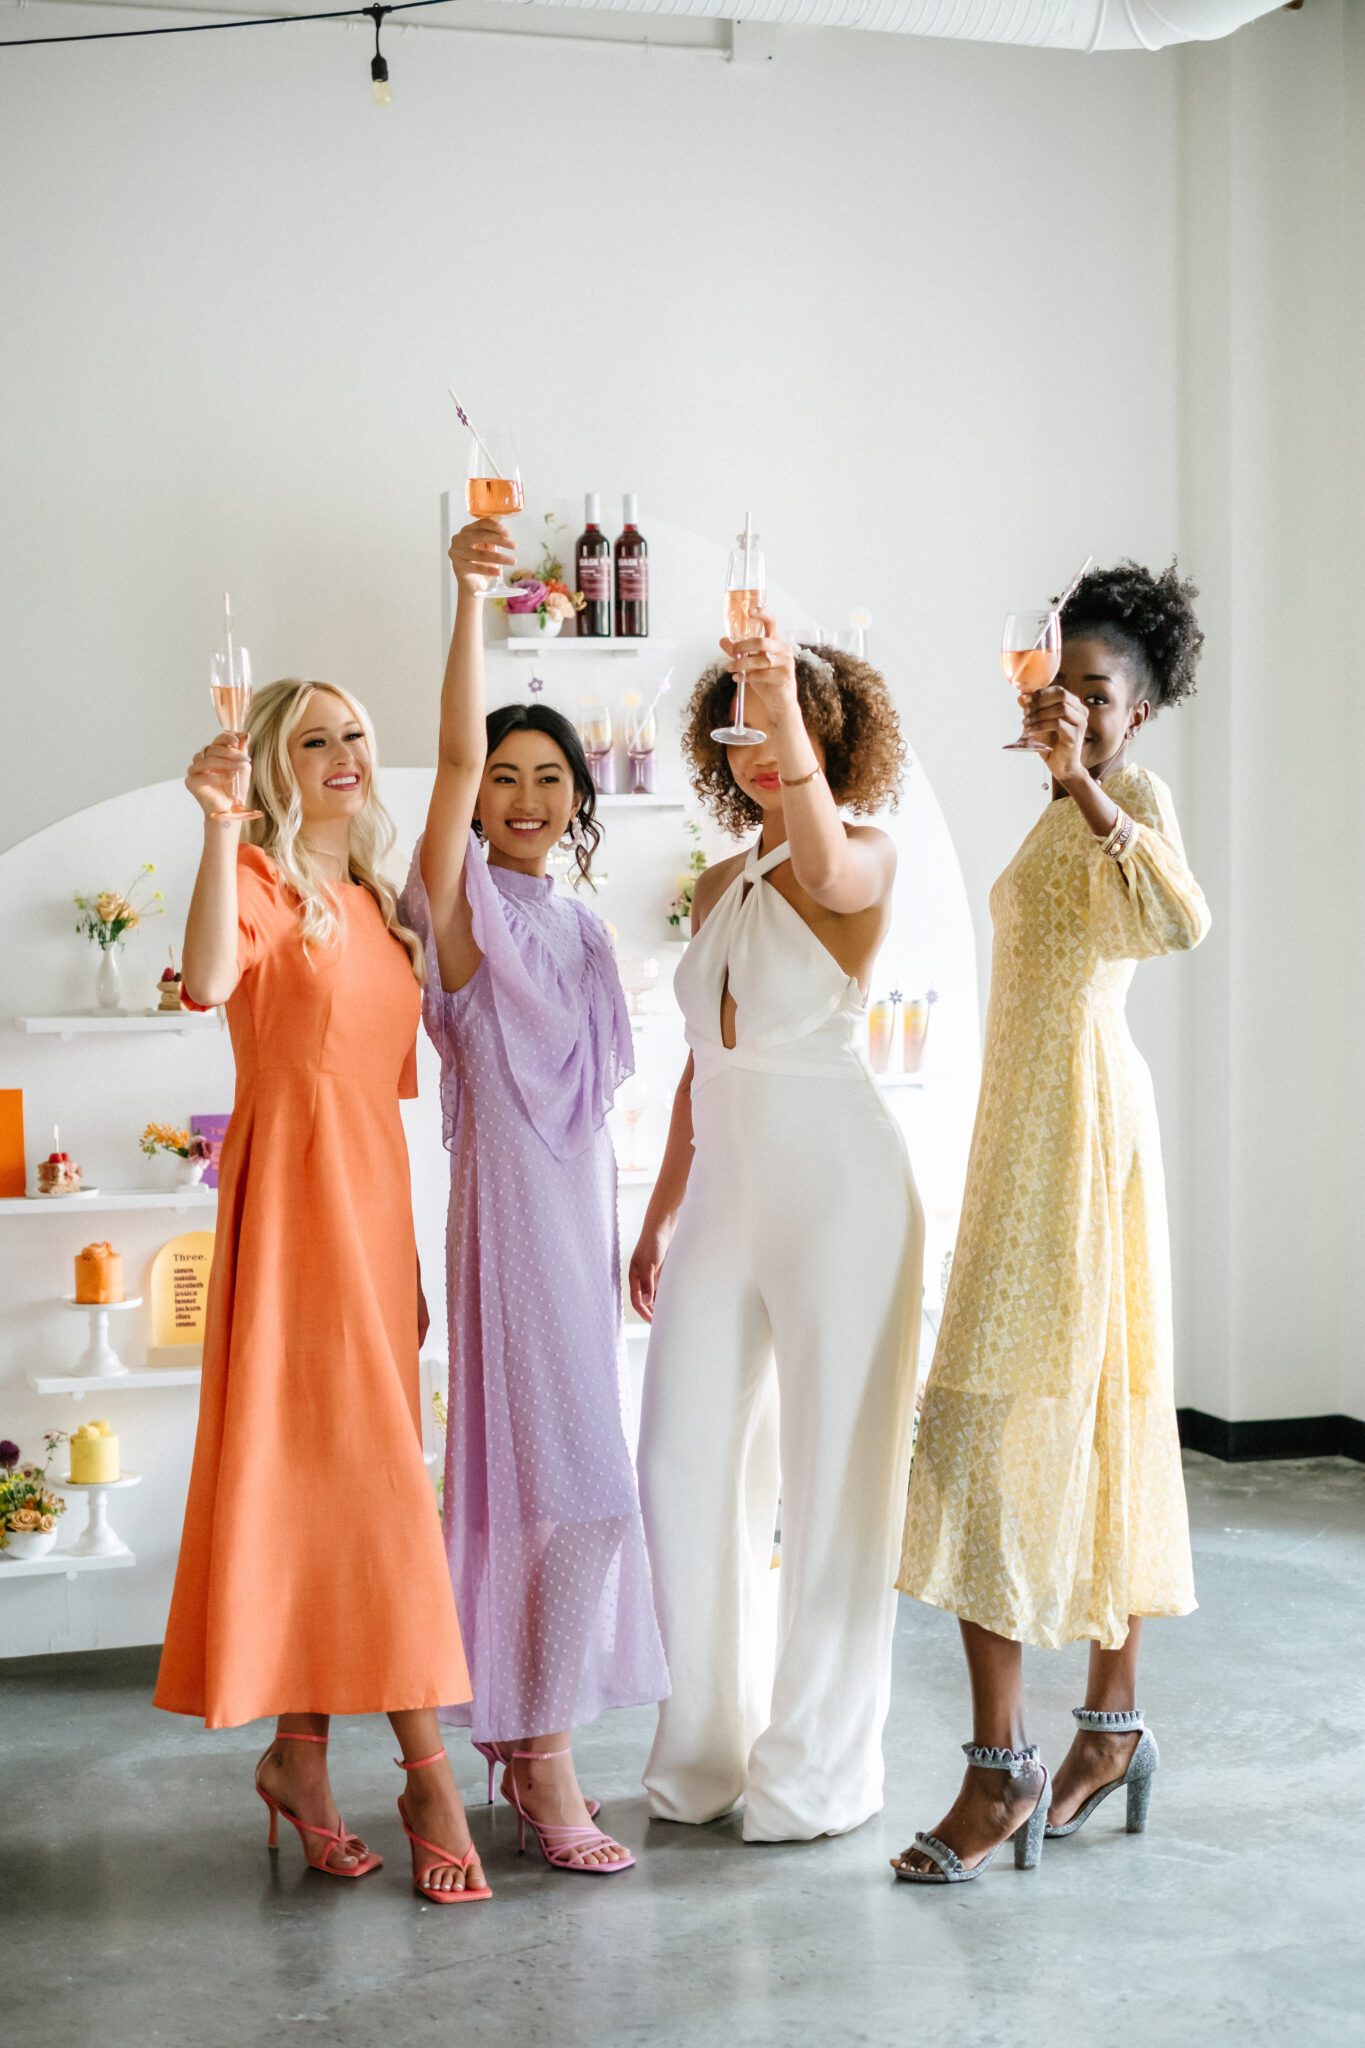 Bright & Colourful Brunch Wedding Inspiration at The Brownstone Calgary, Bronte Bride. Retro-inspired vibrant colour palette of purple, orange, yellow, peach, tangerine and coral. Geometric hanging installation over the tables. Retro-inspired bridal jumpsuit and colourful bridesmaid dresses. 
